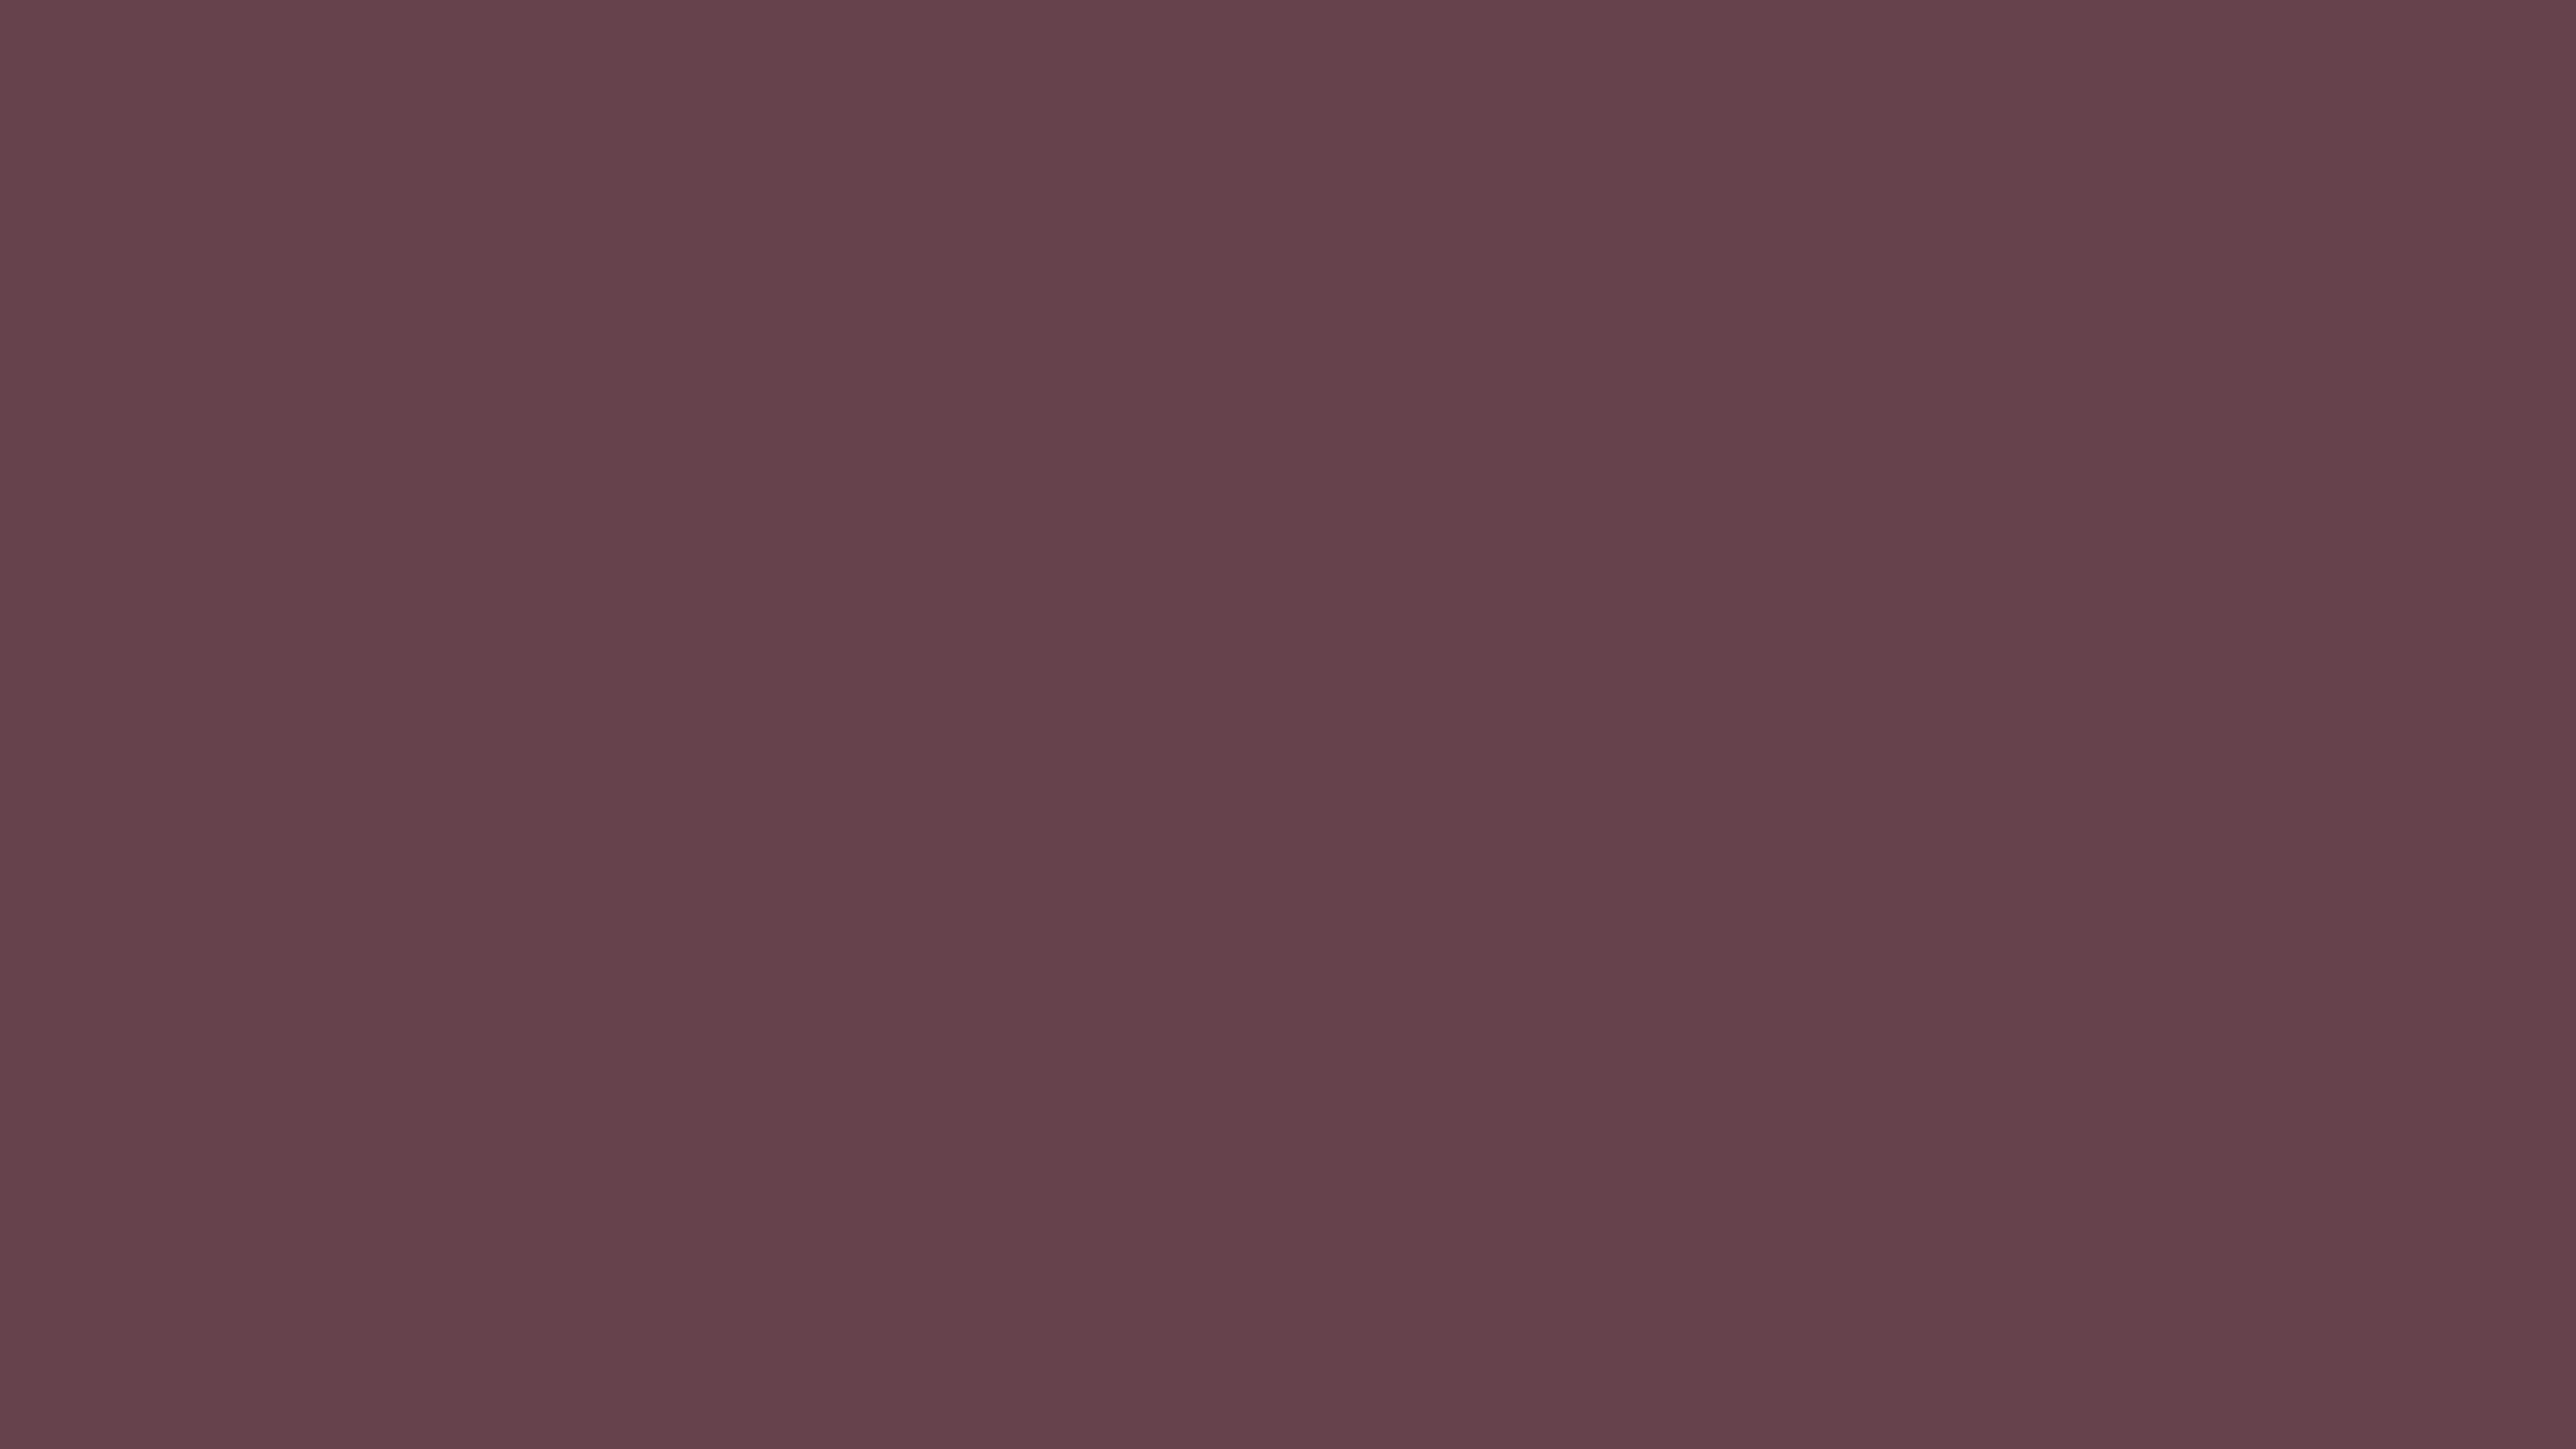 5120x2880 Deep Tuscan Red Solid Color Background